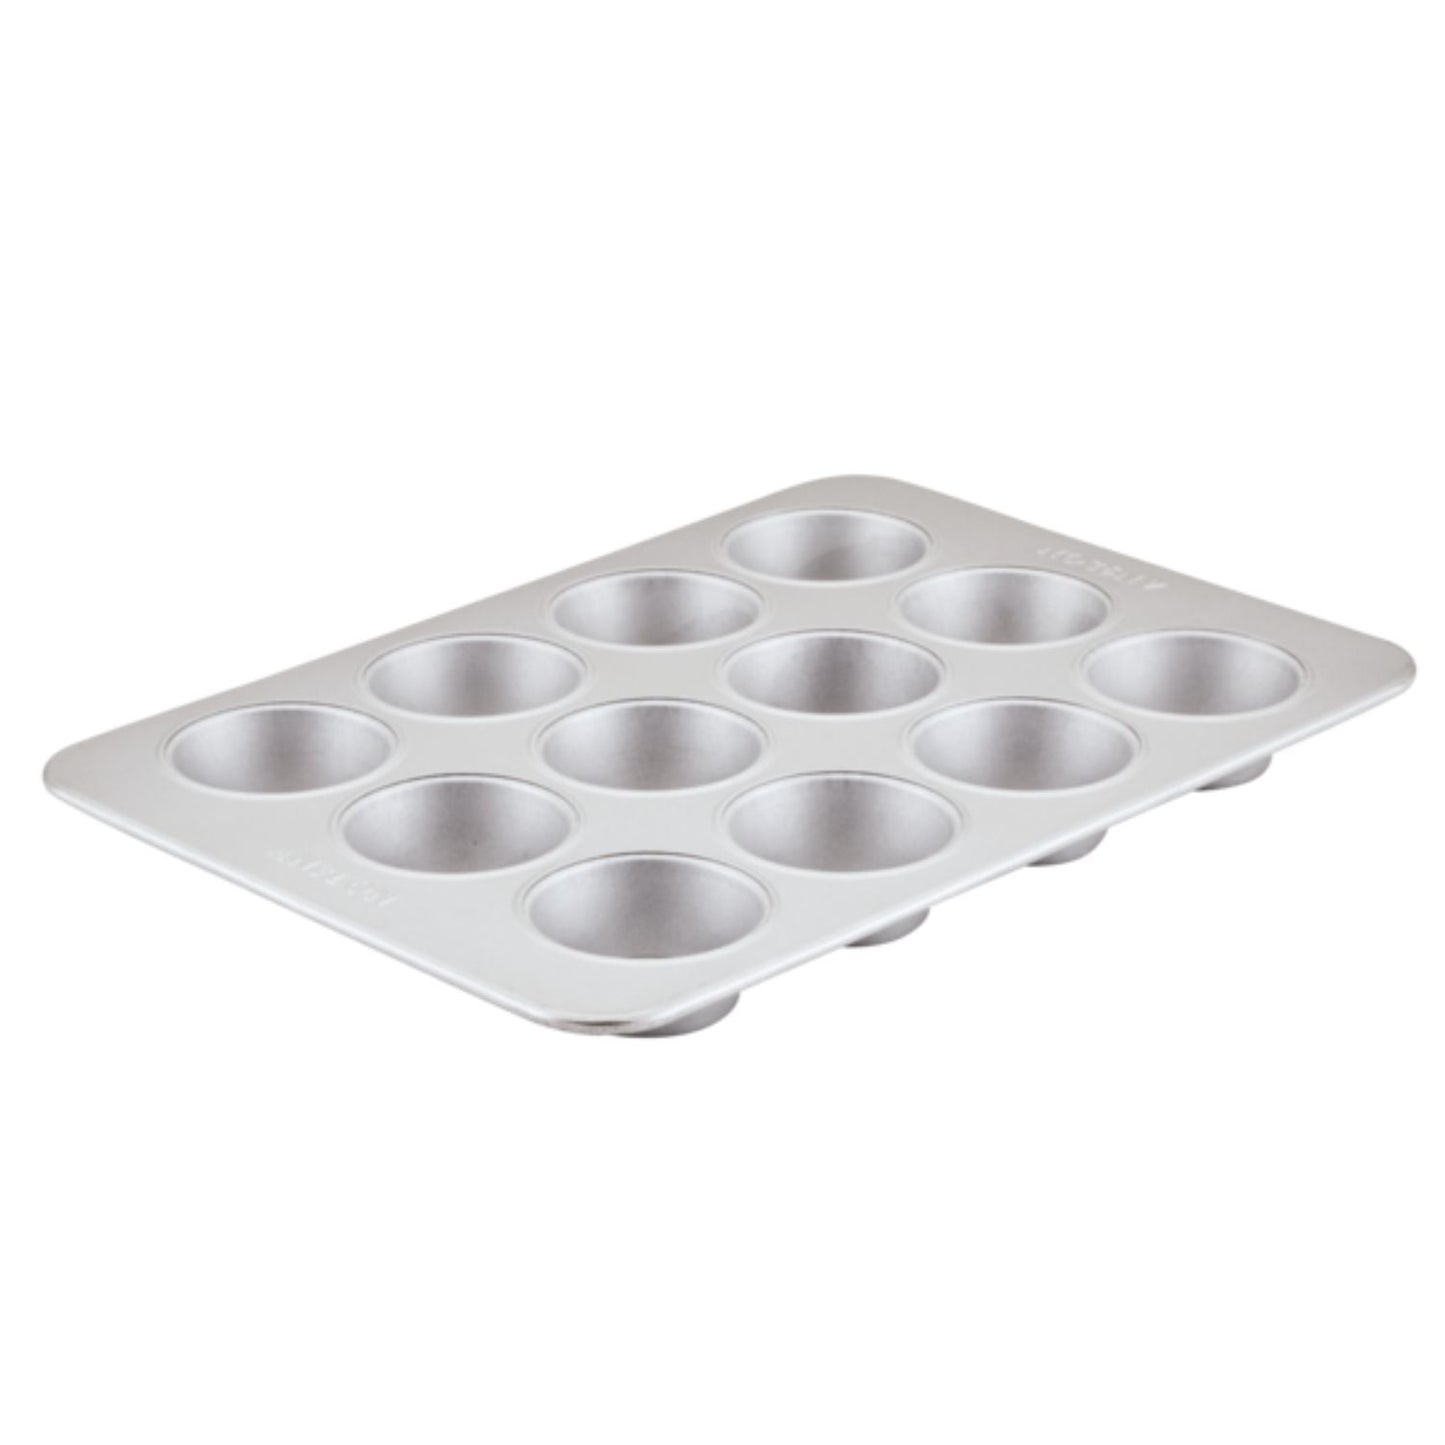 Anolon Pro-Bake Muffin Pan 12 Cup